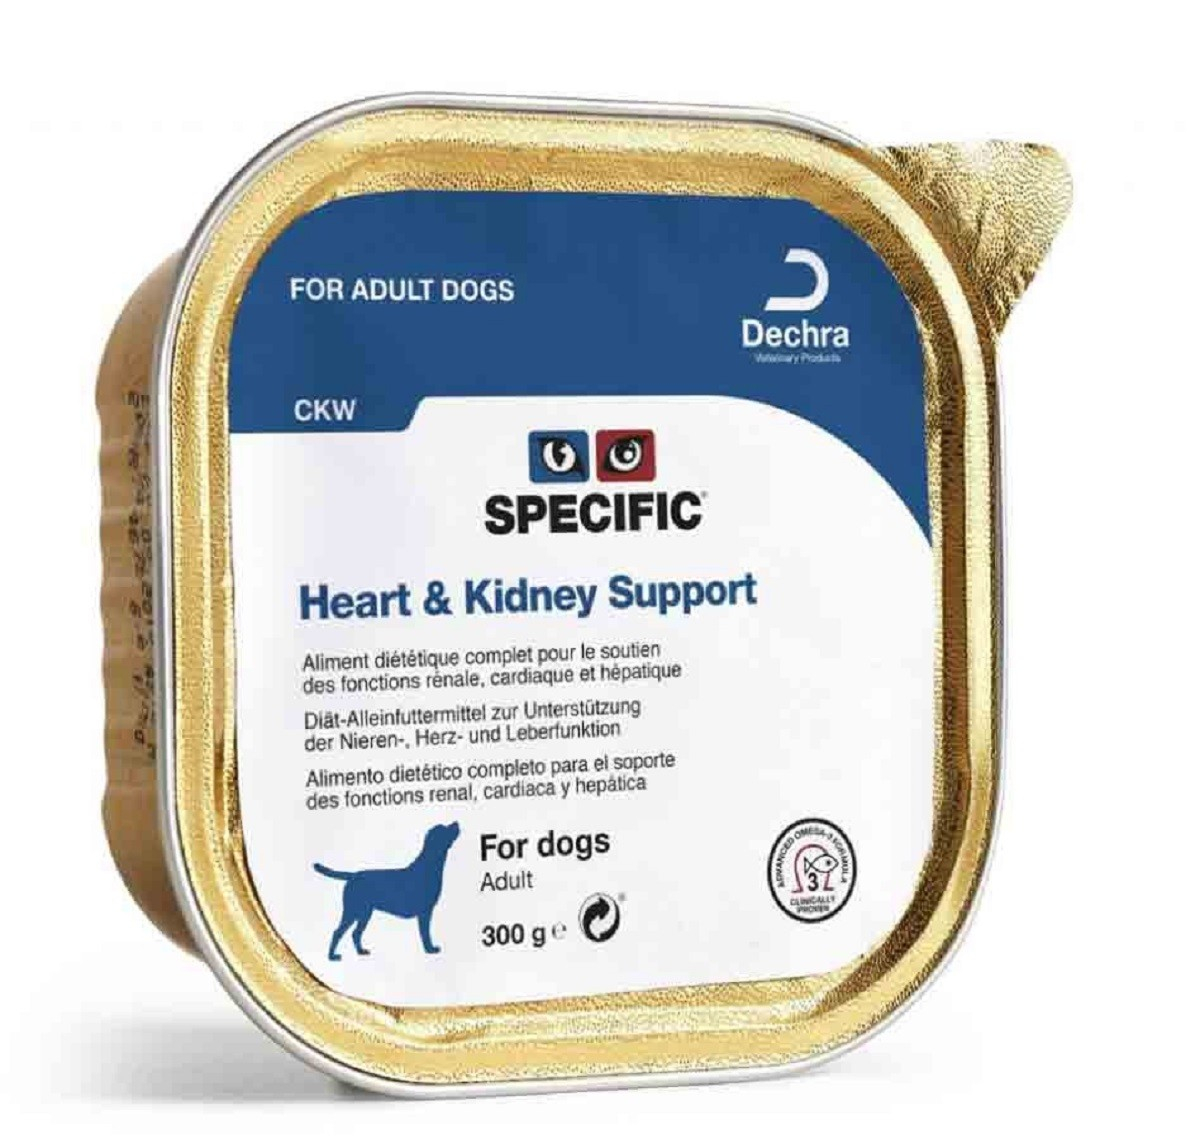 Scatola di 6 Patè CKW Heart & Kidney Support 300g per Cani Adulti